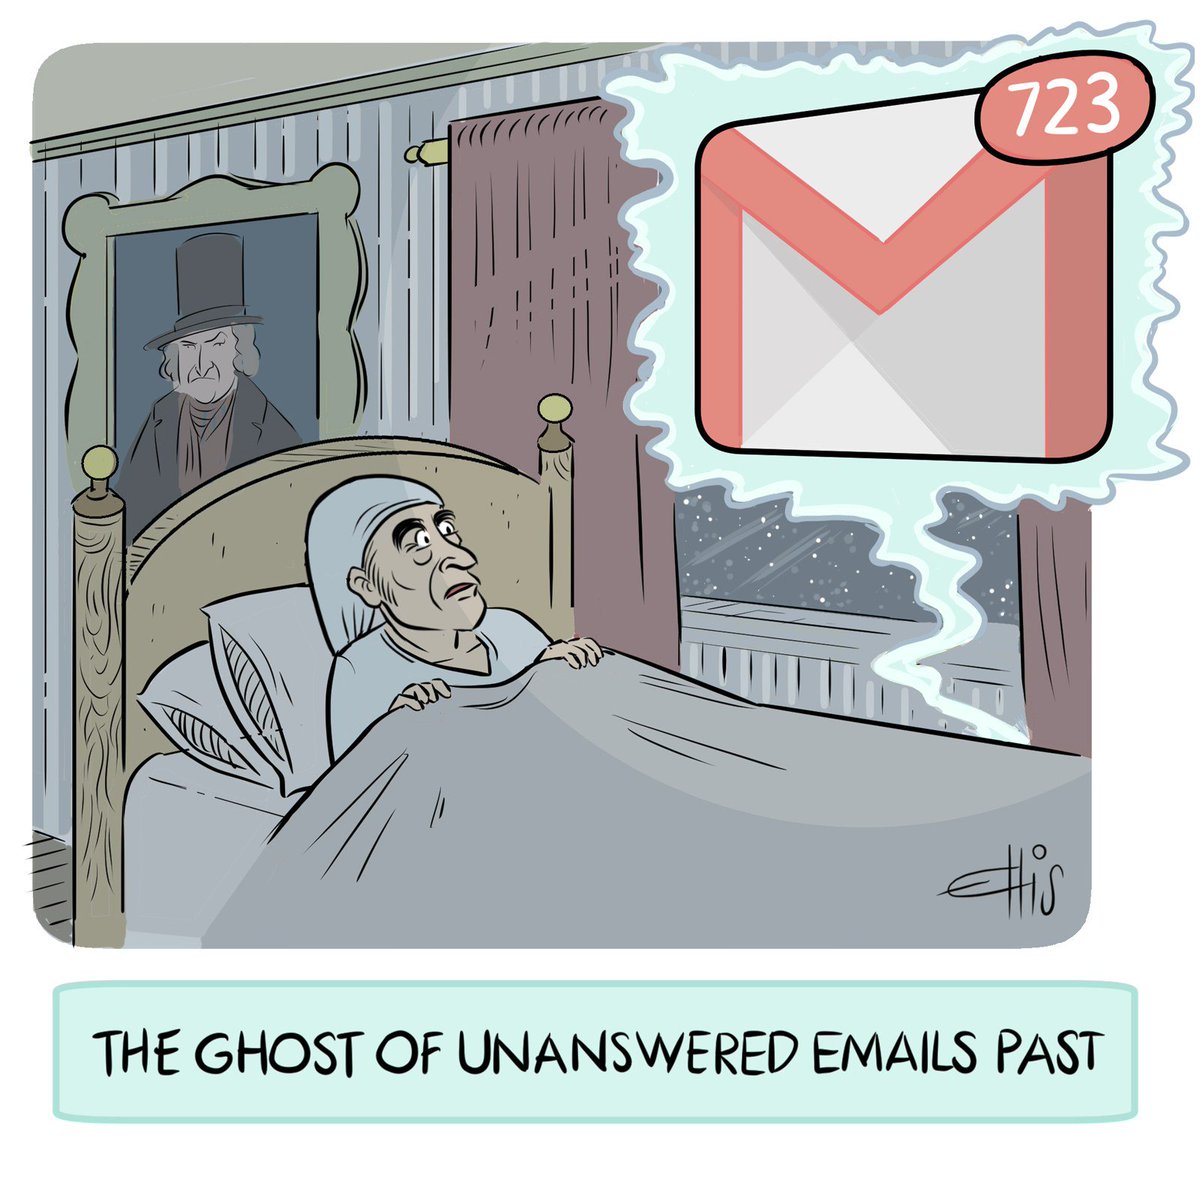 Banish the ghost of unanswered emails past! Bulk select all emails in your private #ProtonMail inbox, custom folders, or others and make them vanish. Comic by Ellis Rosen, with @collectcartoons